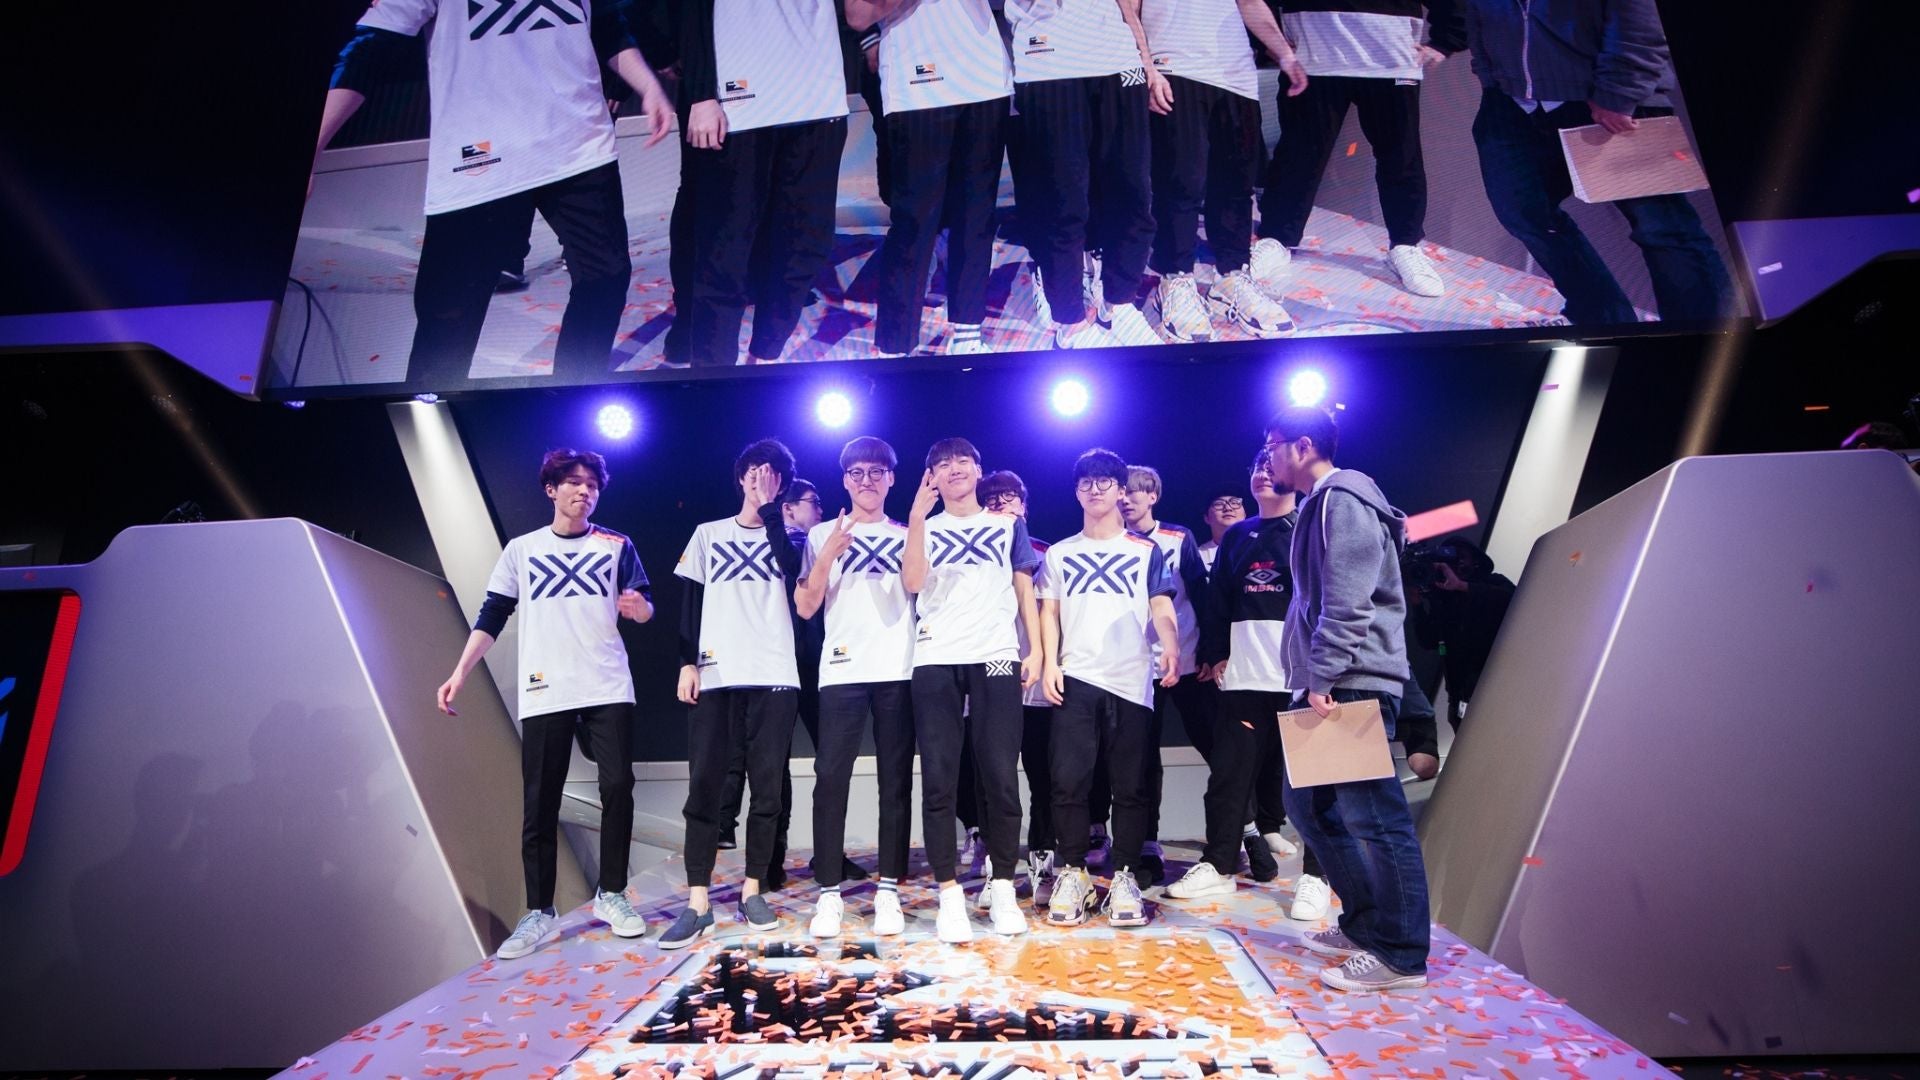 Park (far left) celebrates with his team after winning the Overwatch League Stage Three Championship tournament. (Photo: Blizzard Entertainment)